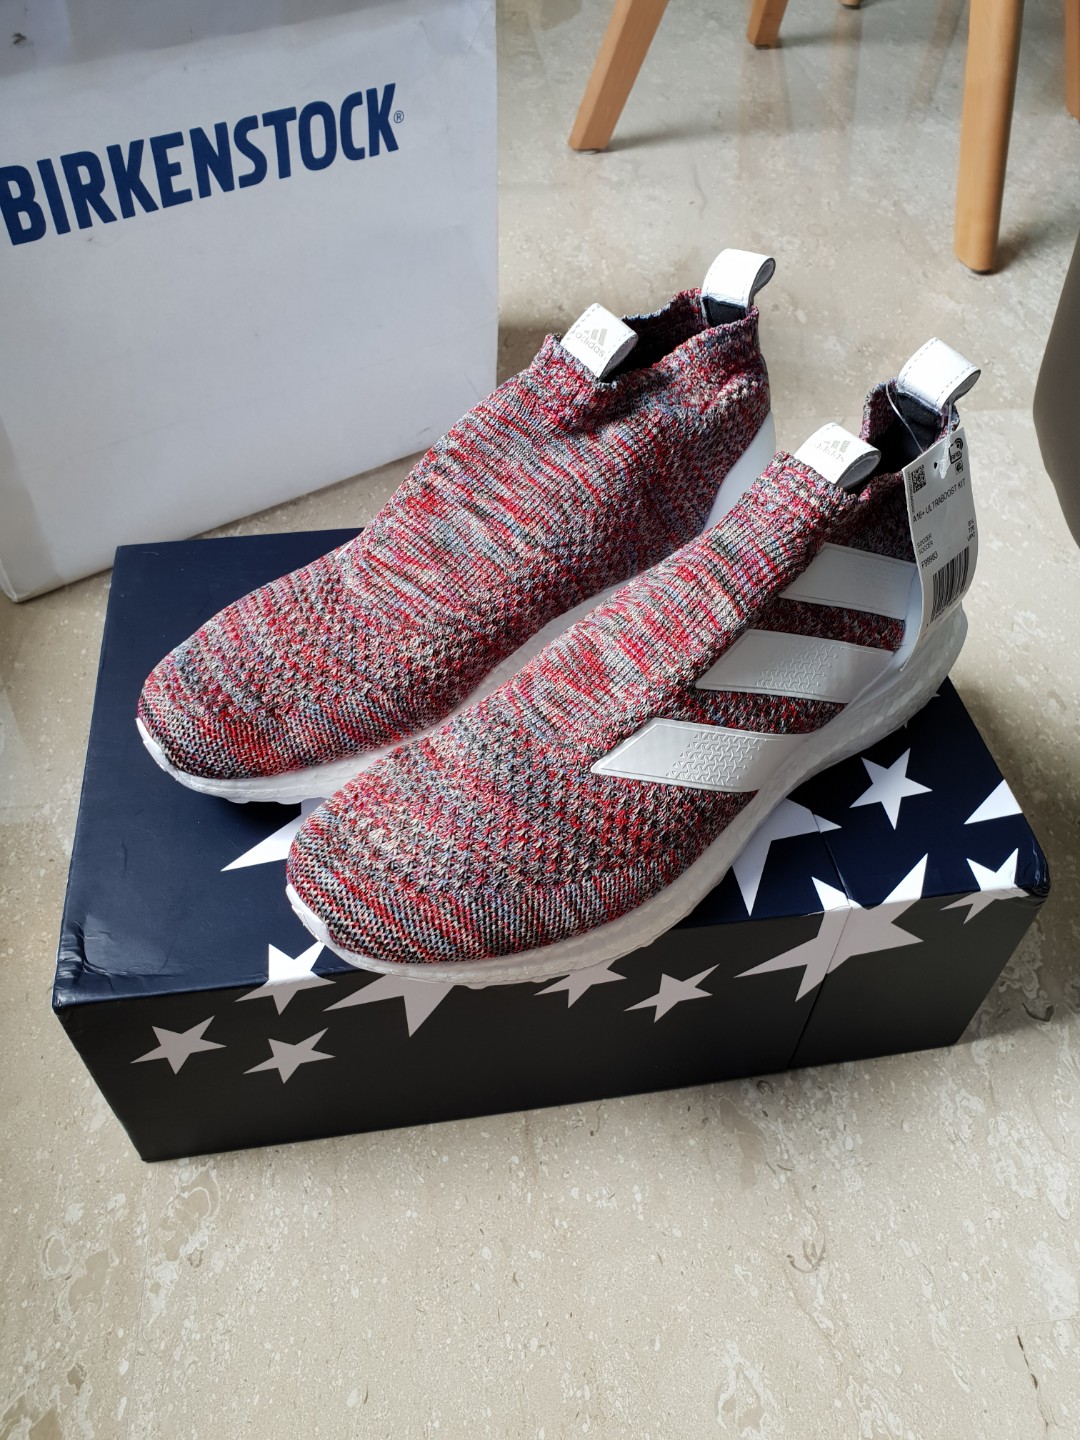 kith ace 16 ultra boost